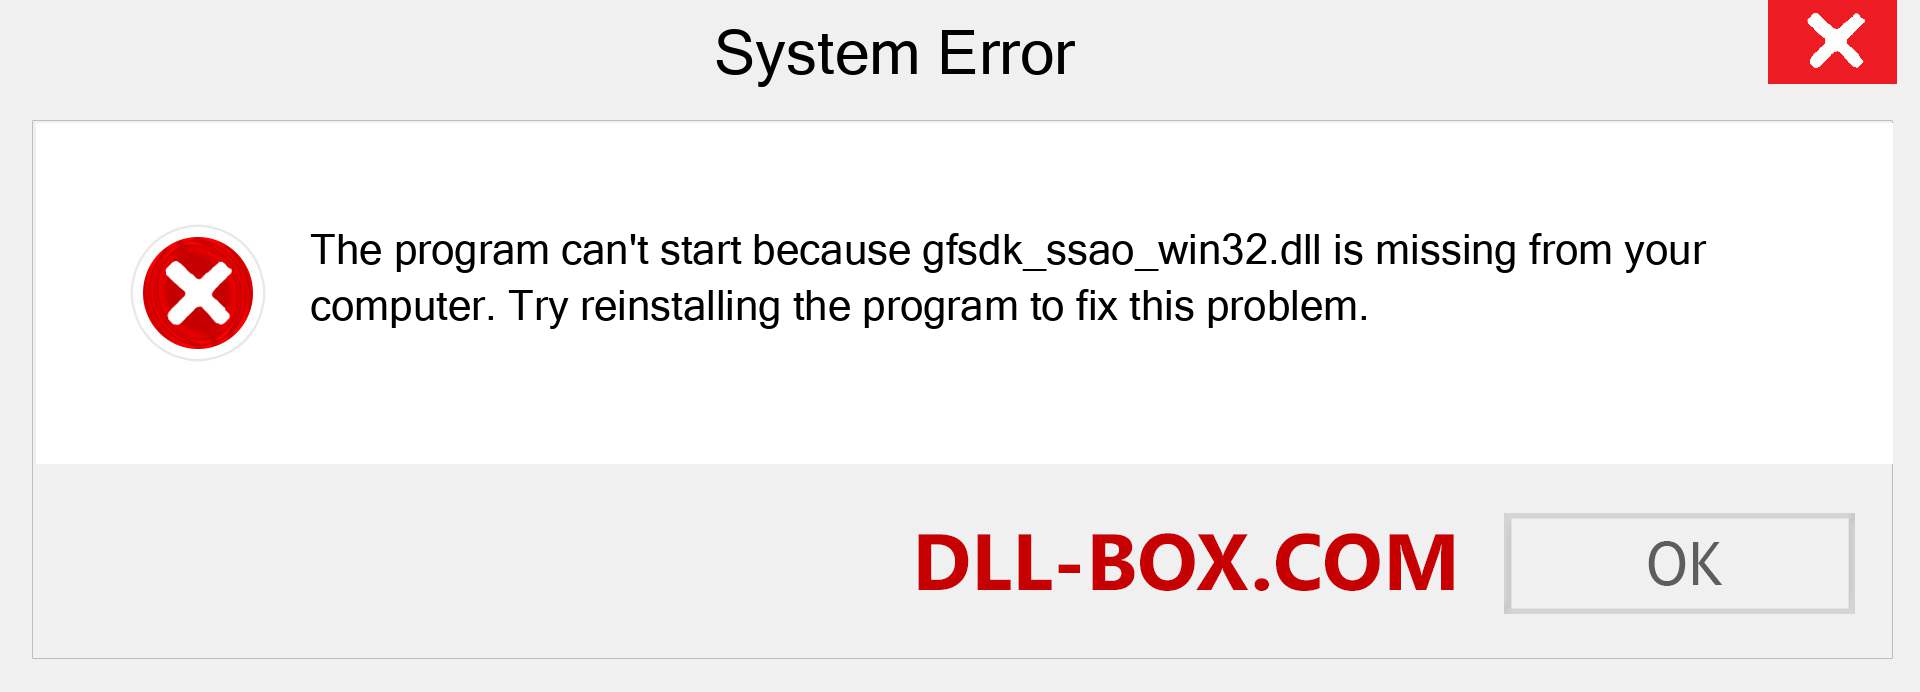  gfsdk_ssao_win32.dll file is missing?. Download for Windows 7, 8, 10 - Fix  gfsdk_ssao_win32 dll Missing Error on Windows, photos, images